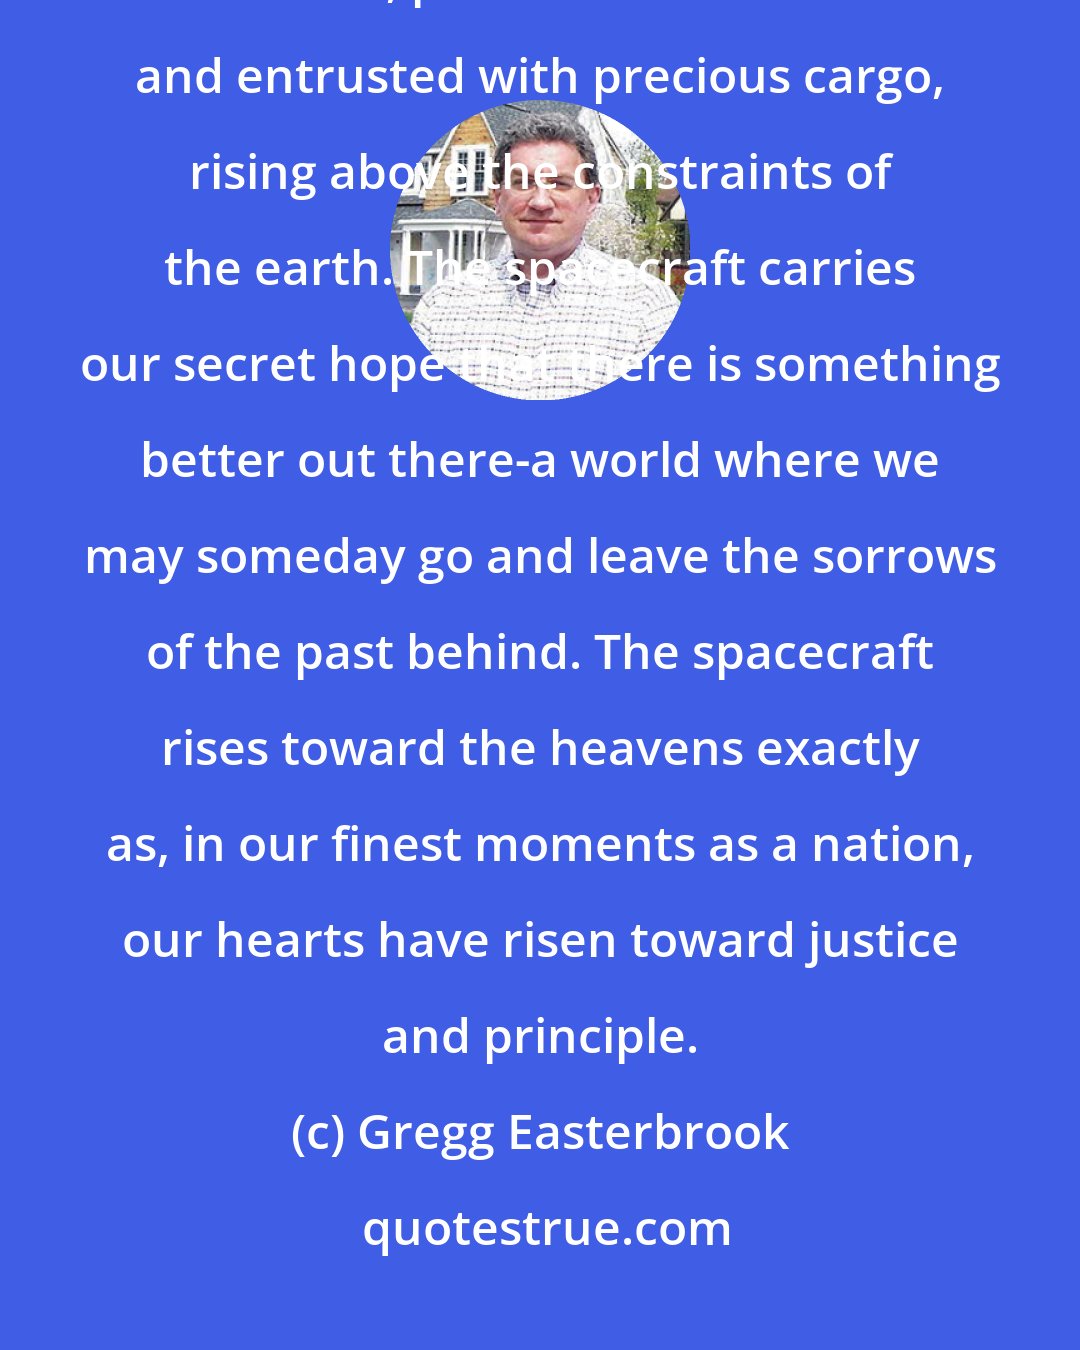 Gregg Easterbrook: A spacecraft is a metaphor of national inspiration: majestic, technologically advanced, produced at dear cost and entrusted with precious cargo, rising above the constraints of the earth. The spacecraft carries our secret hope that there is something better out there-a world where we may someday go and leave the sorrows of the past behind. The spacecraft rises toward the heavens exactly as, in our finest moments as a nation, our hearts have risen toward justice and principle.